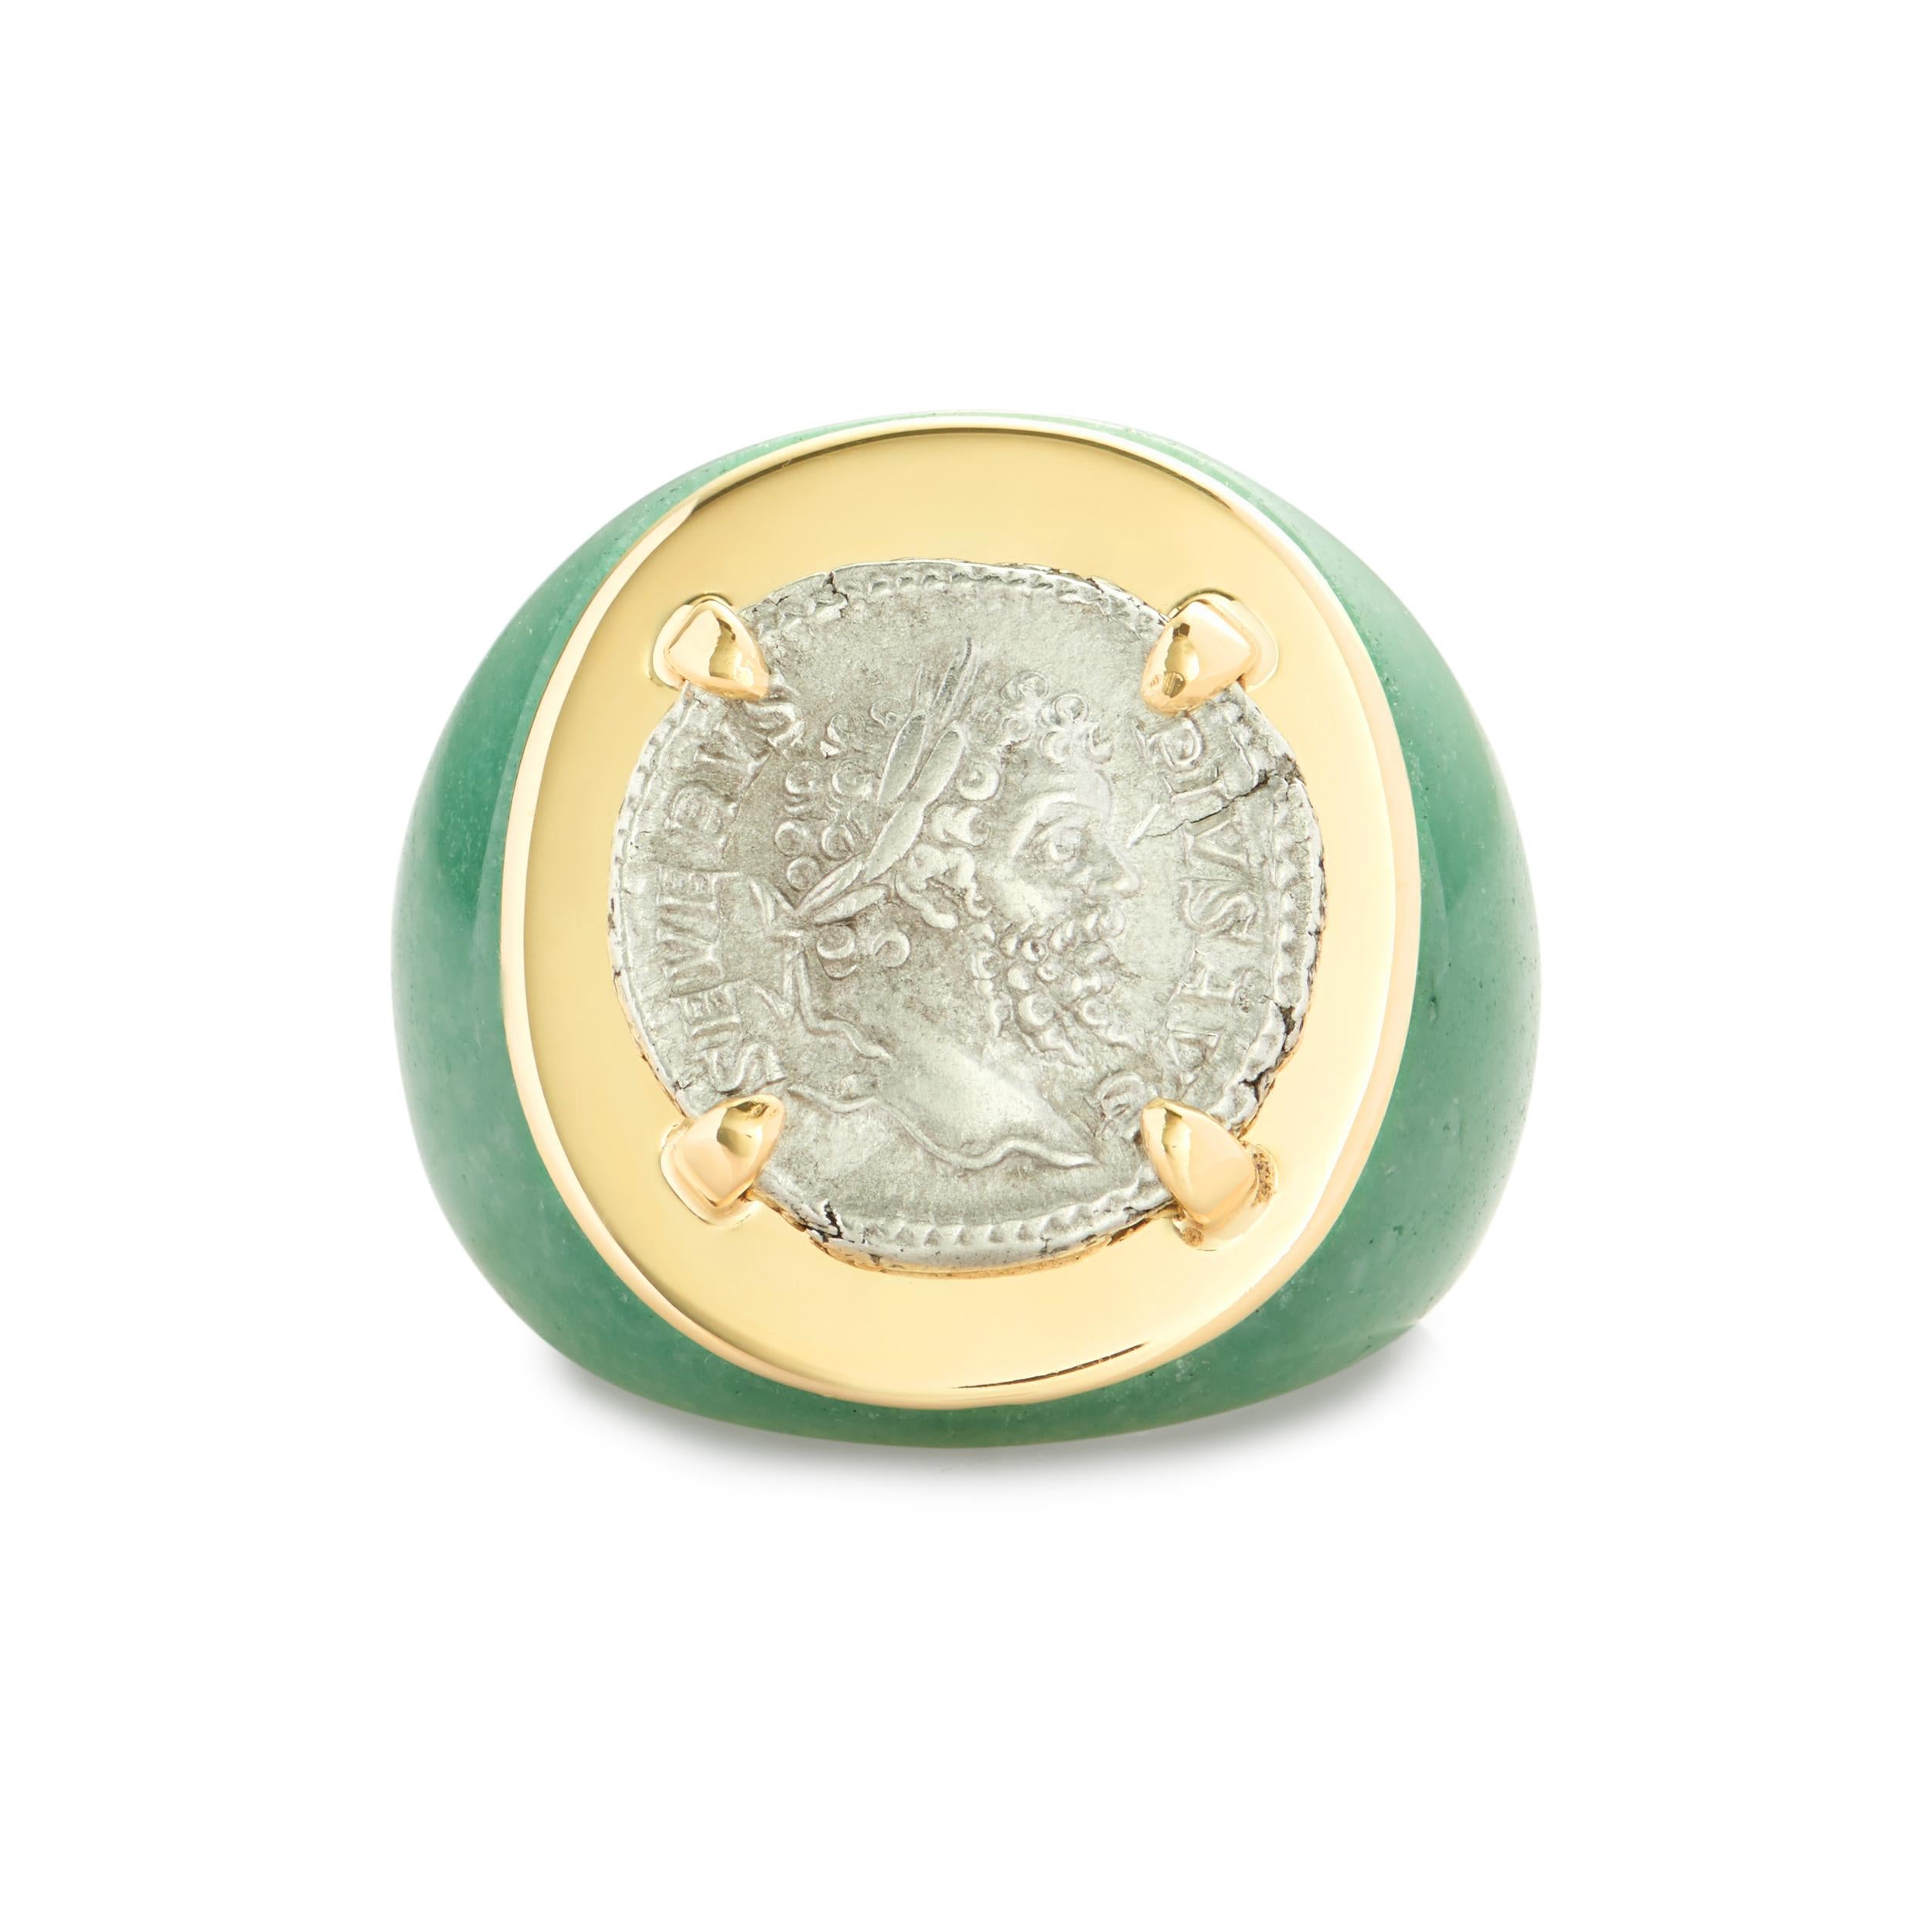 This DUBINI coin ring from the 'Empires' collection features a one-of-a-kind authentic roman silver denarius coin minted circa 210-211 A.D. set in 18kt yellow gold and aventurine base ring.

* Due to the unique process of hand carving coins in